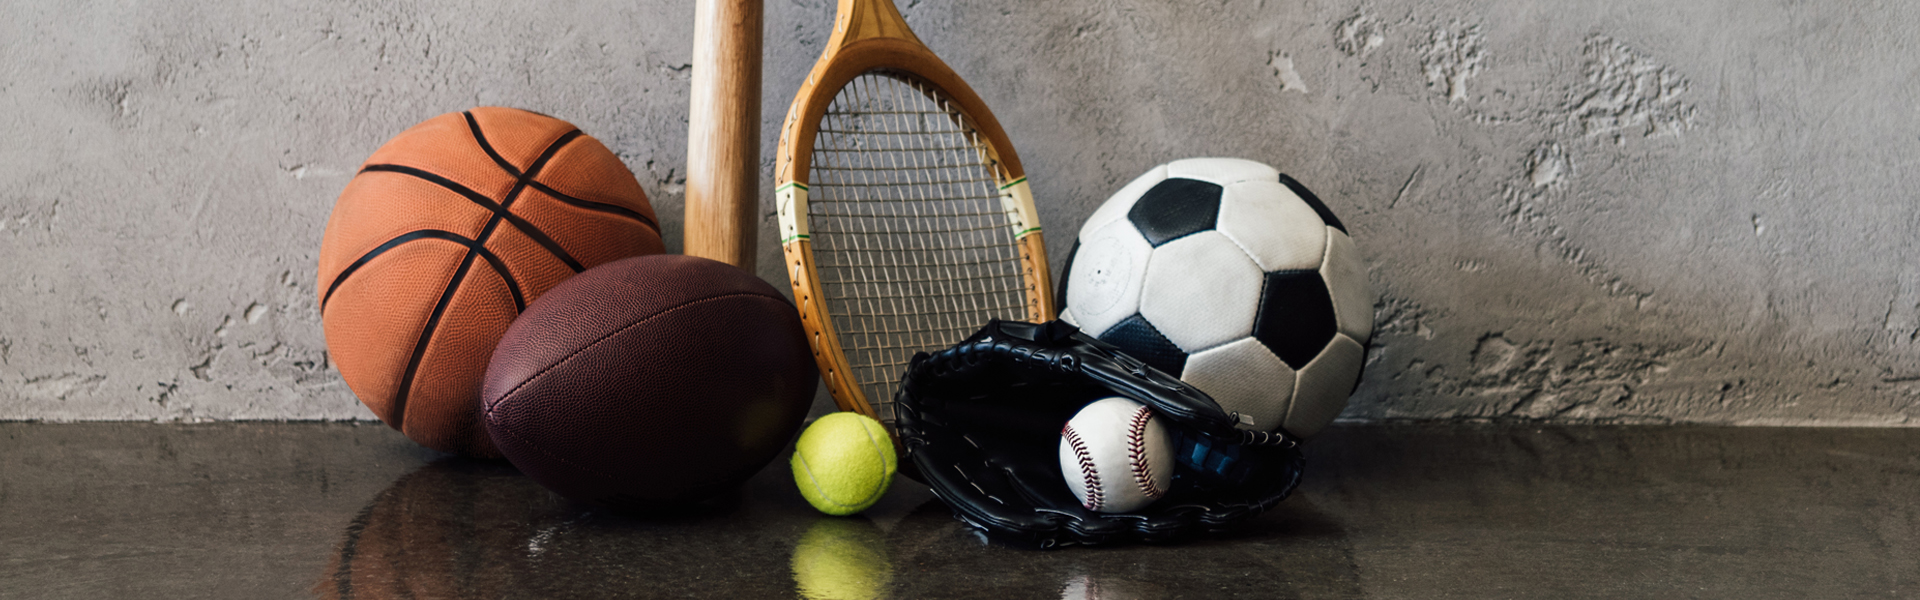 Single-Sport Specialization vs. Playing Multiple Sports | Mercy Health Blog